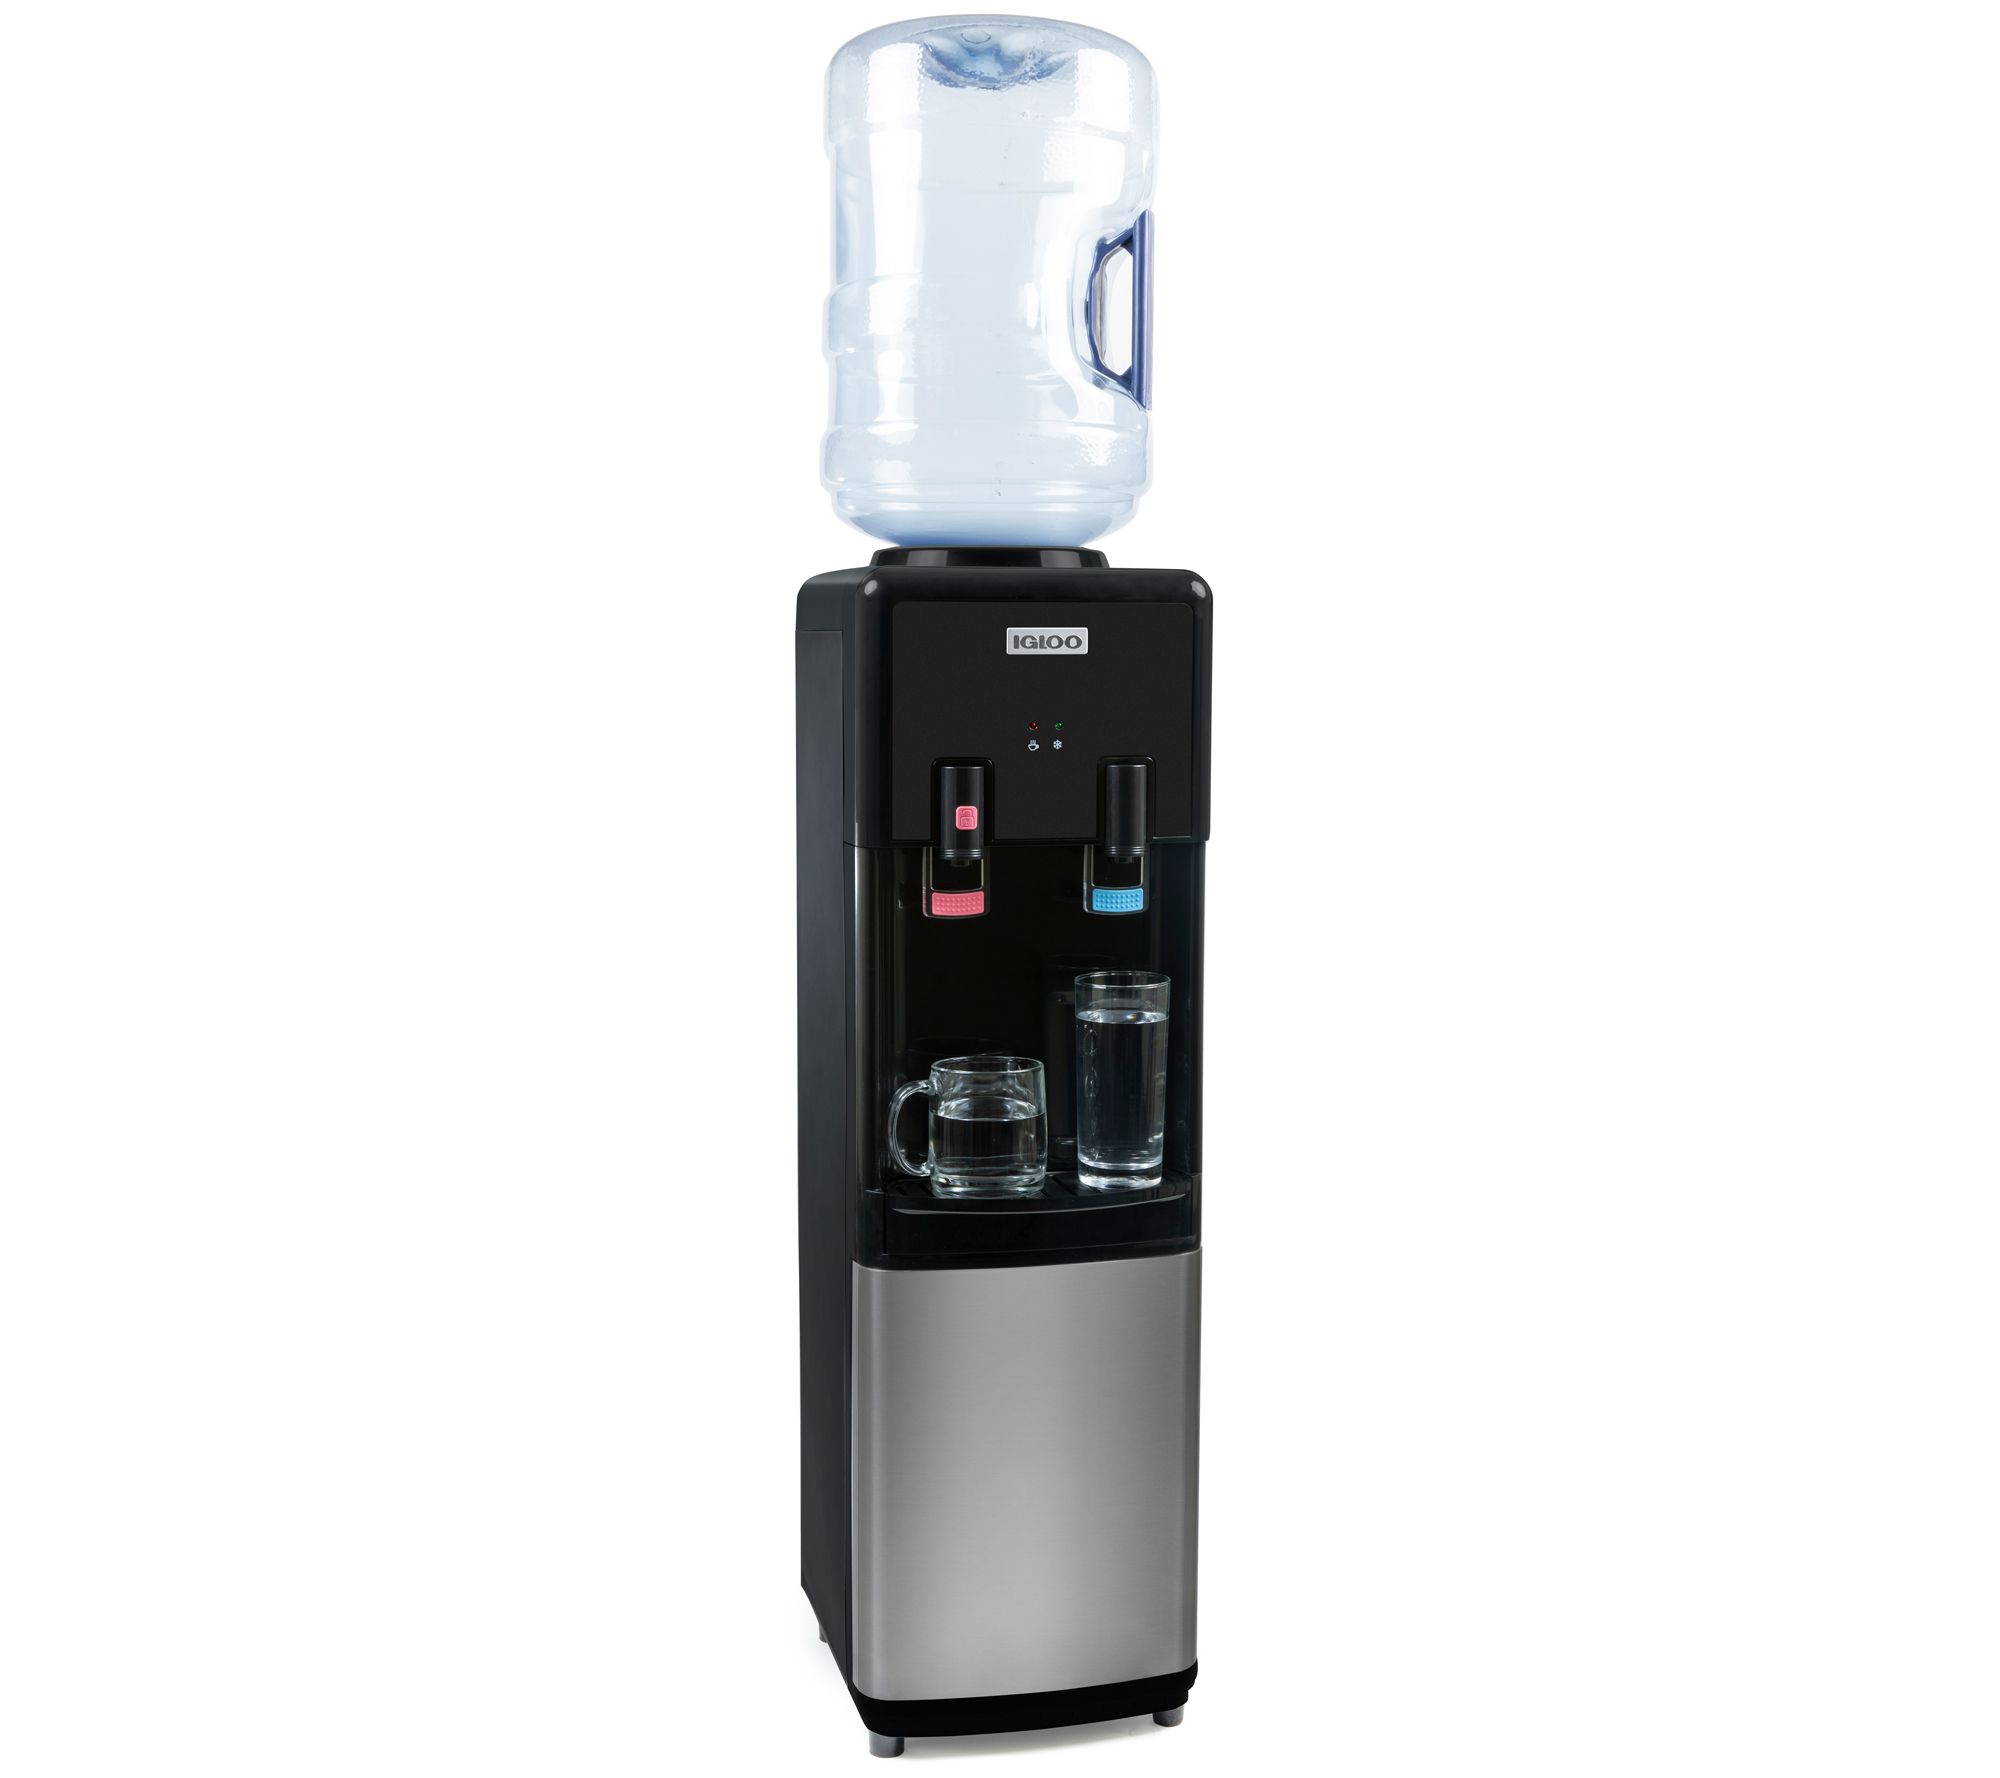 Sunpentown 3.6L Hot Water Dispenser with Dual-Pump System - Stainless Steel